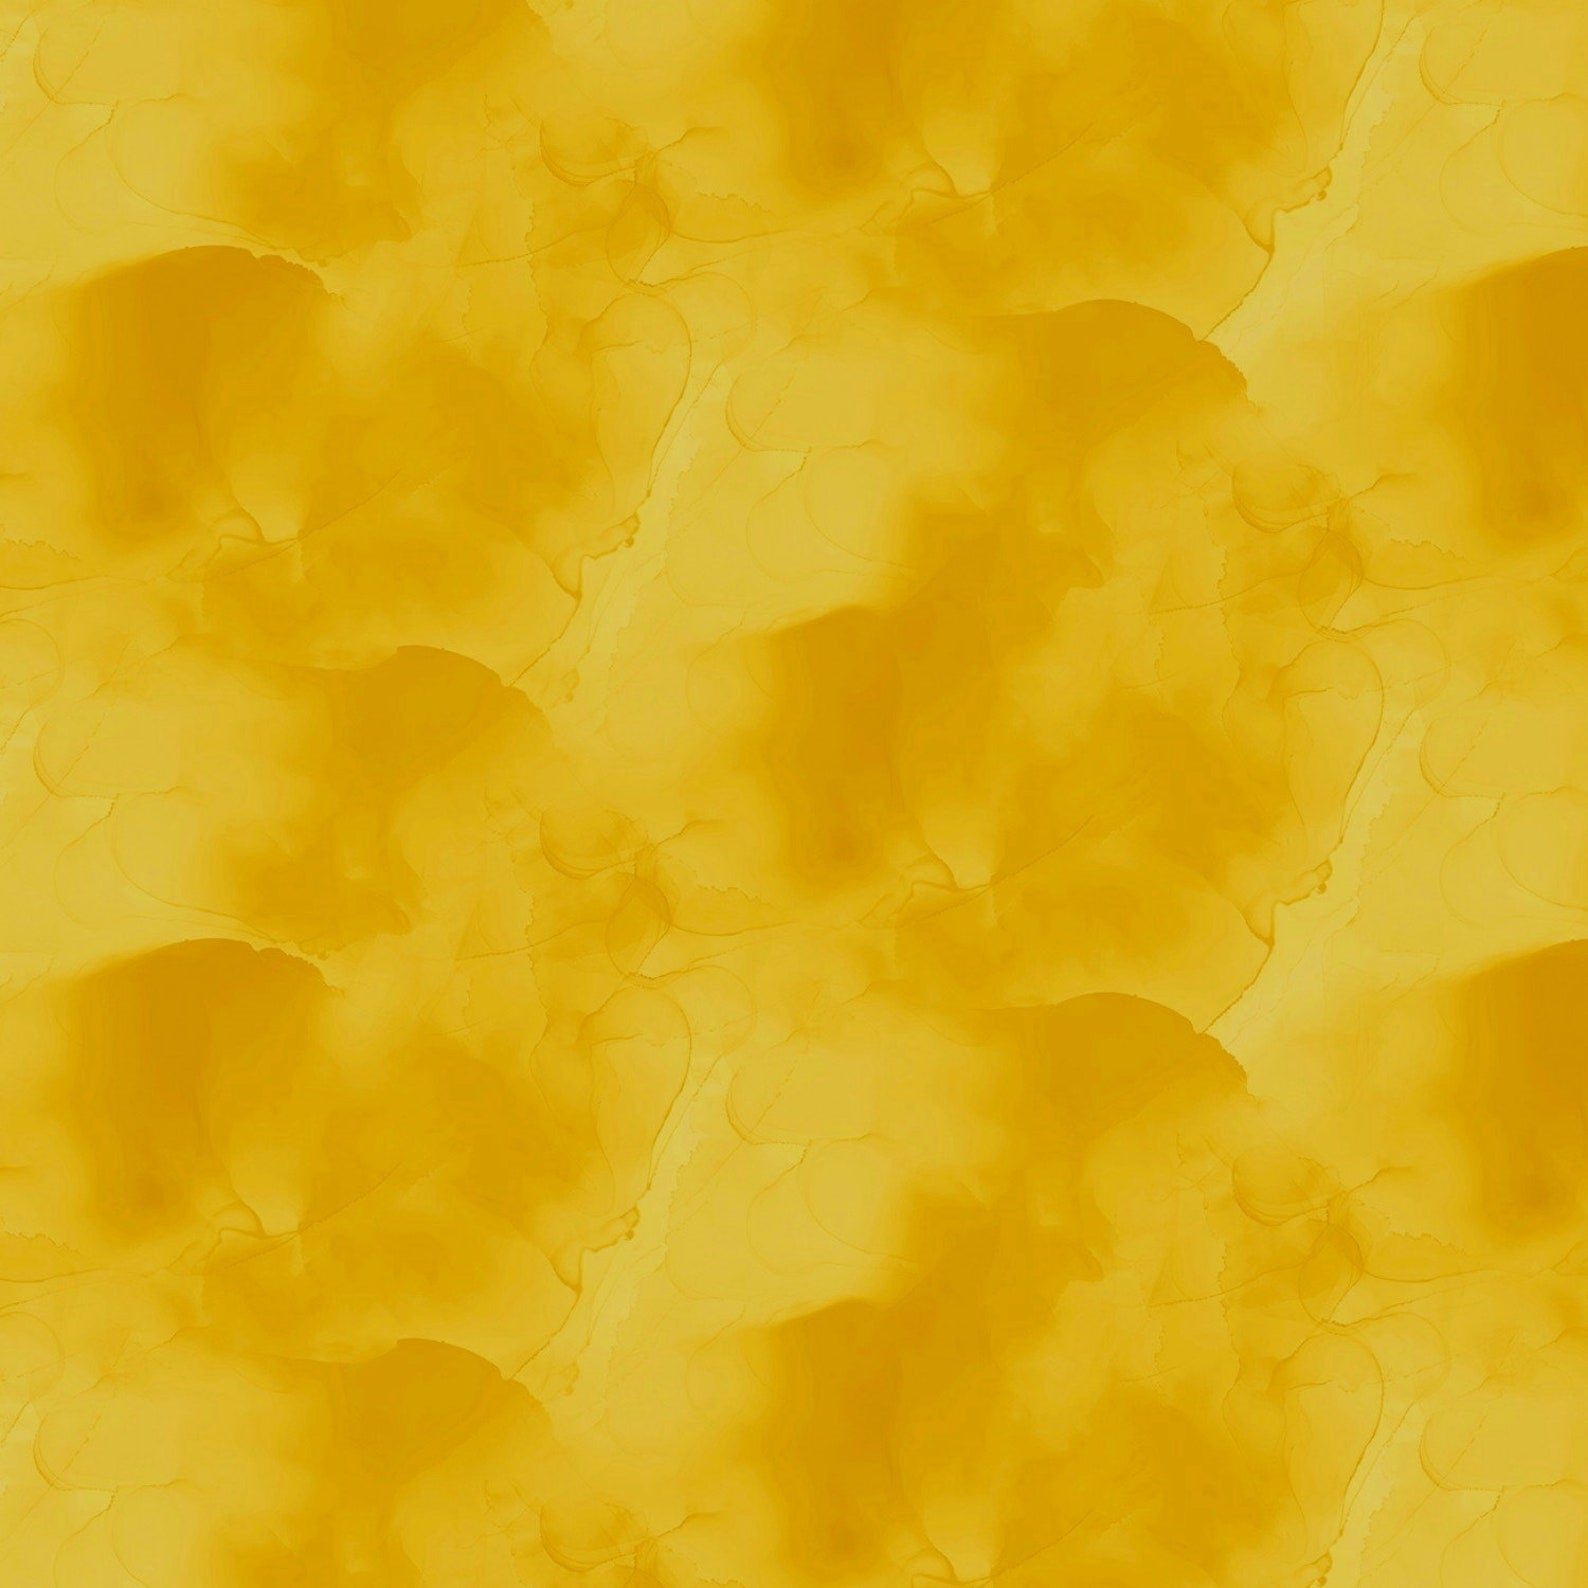 Watercolor Texture Yellow